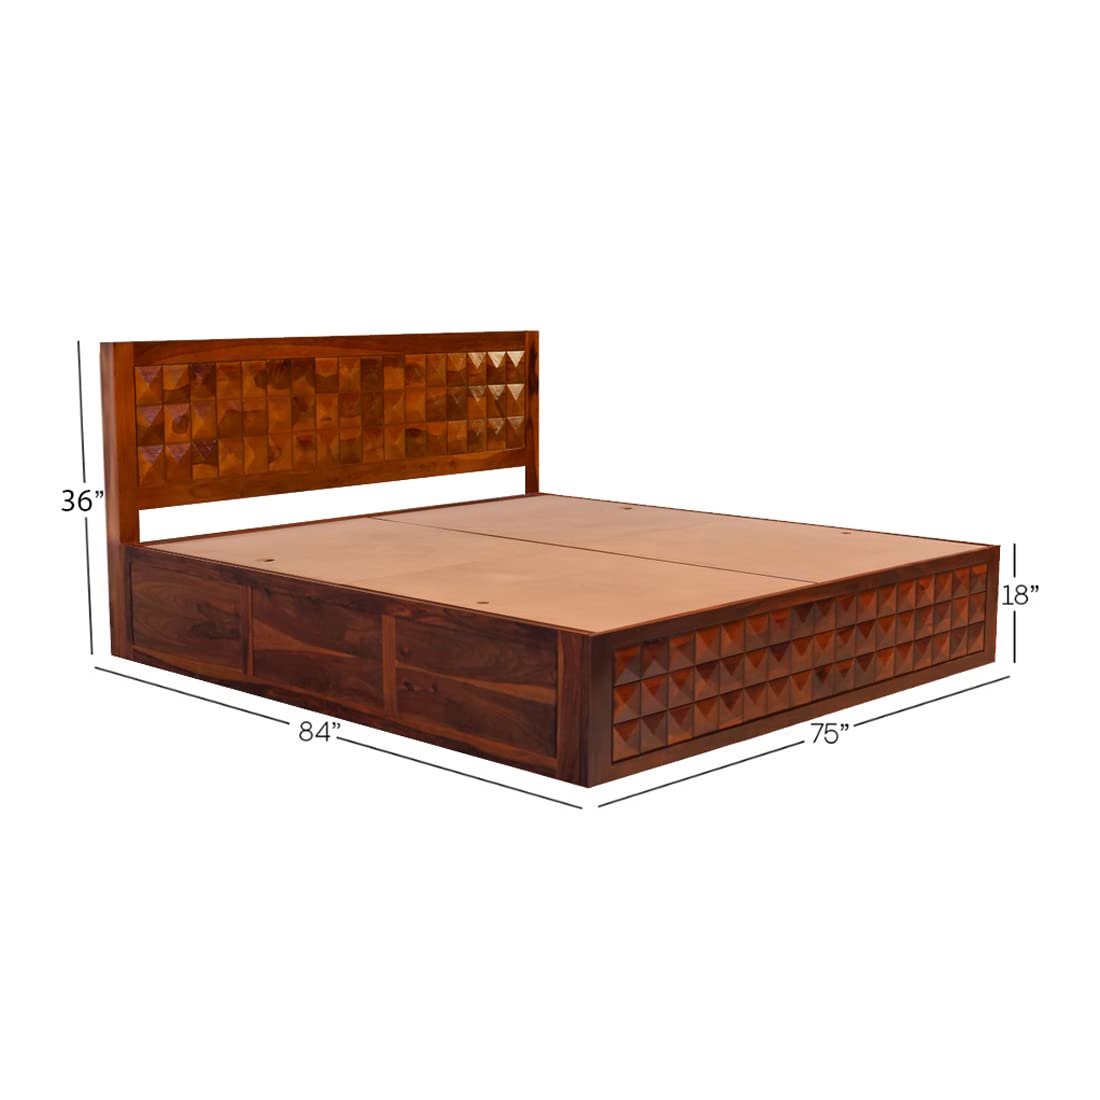 MoonWooden Sheesham Solid Wood King Size Bed with Storage | Rosewood Bedroom Double Cot | Noise Free | Zero Partner Disturbance (Compartment-4, Size-78x72 Inches, Dark Brown)